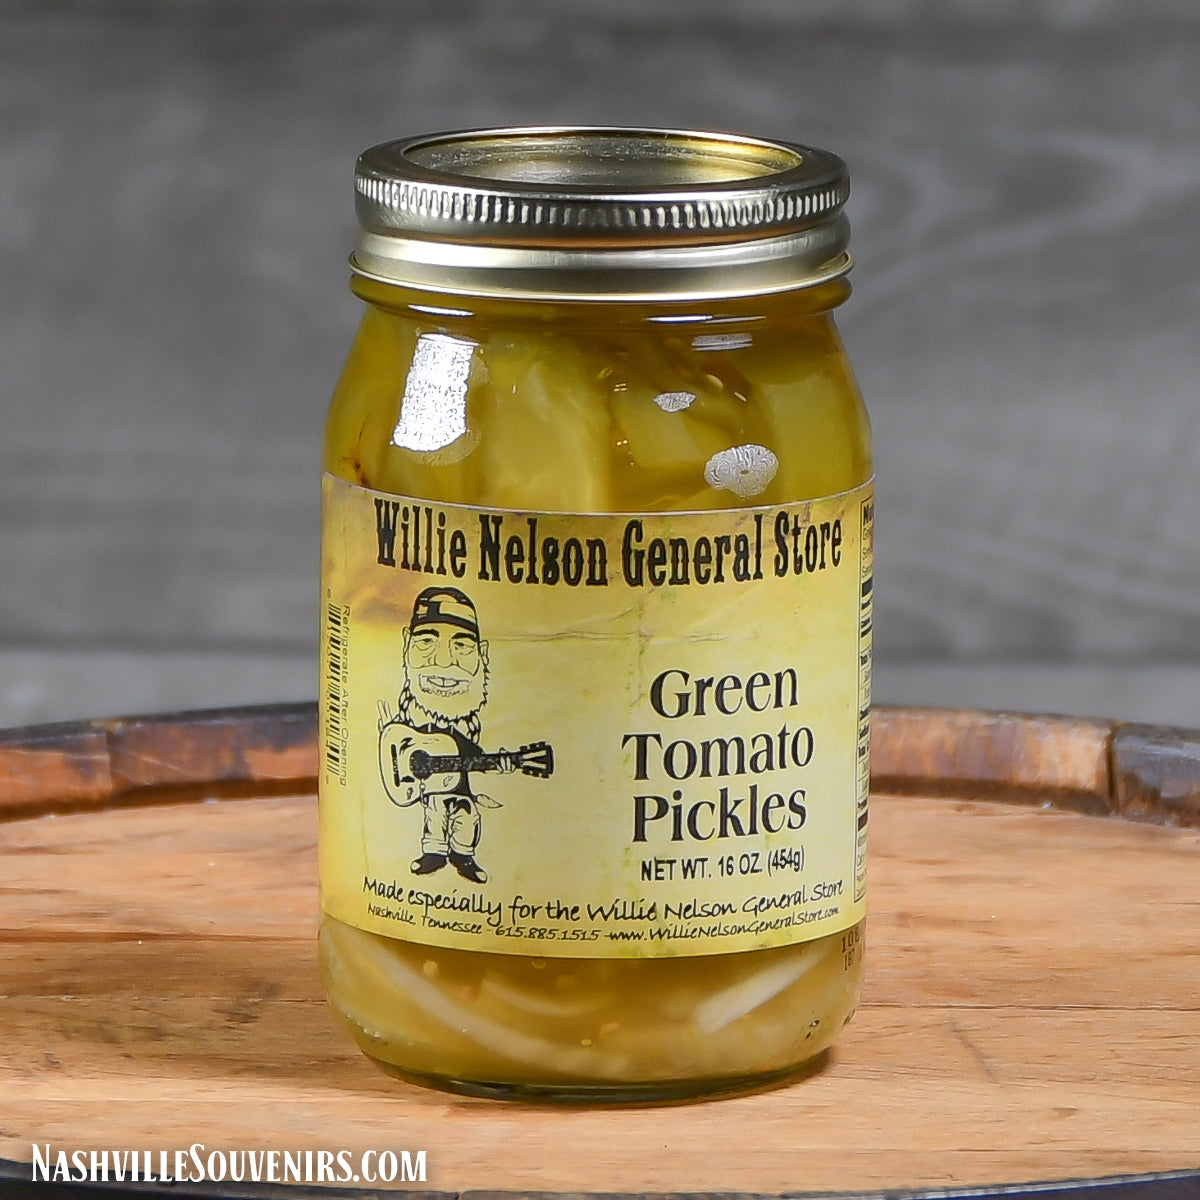 Willie Nelson General Store Green Tomato Pickles